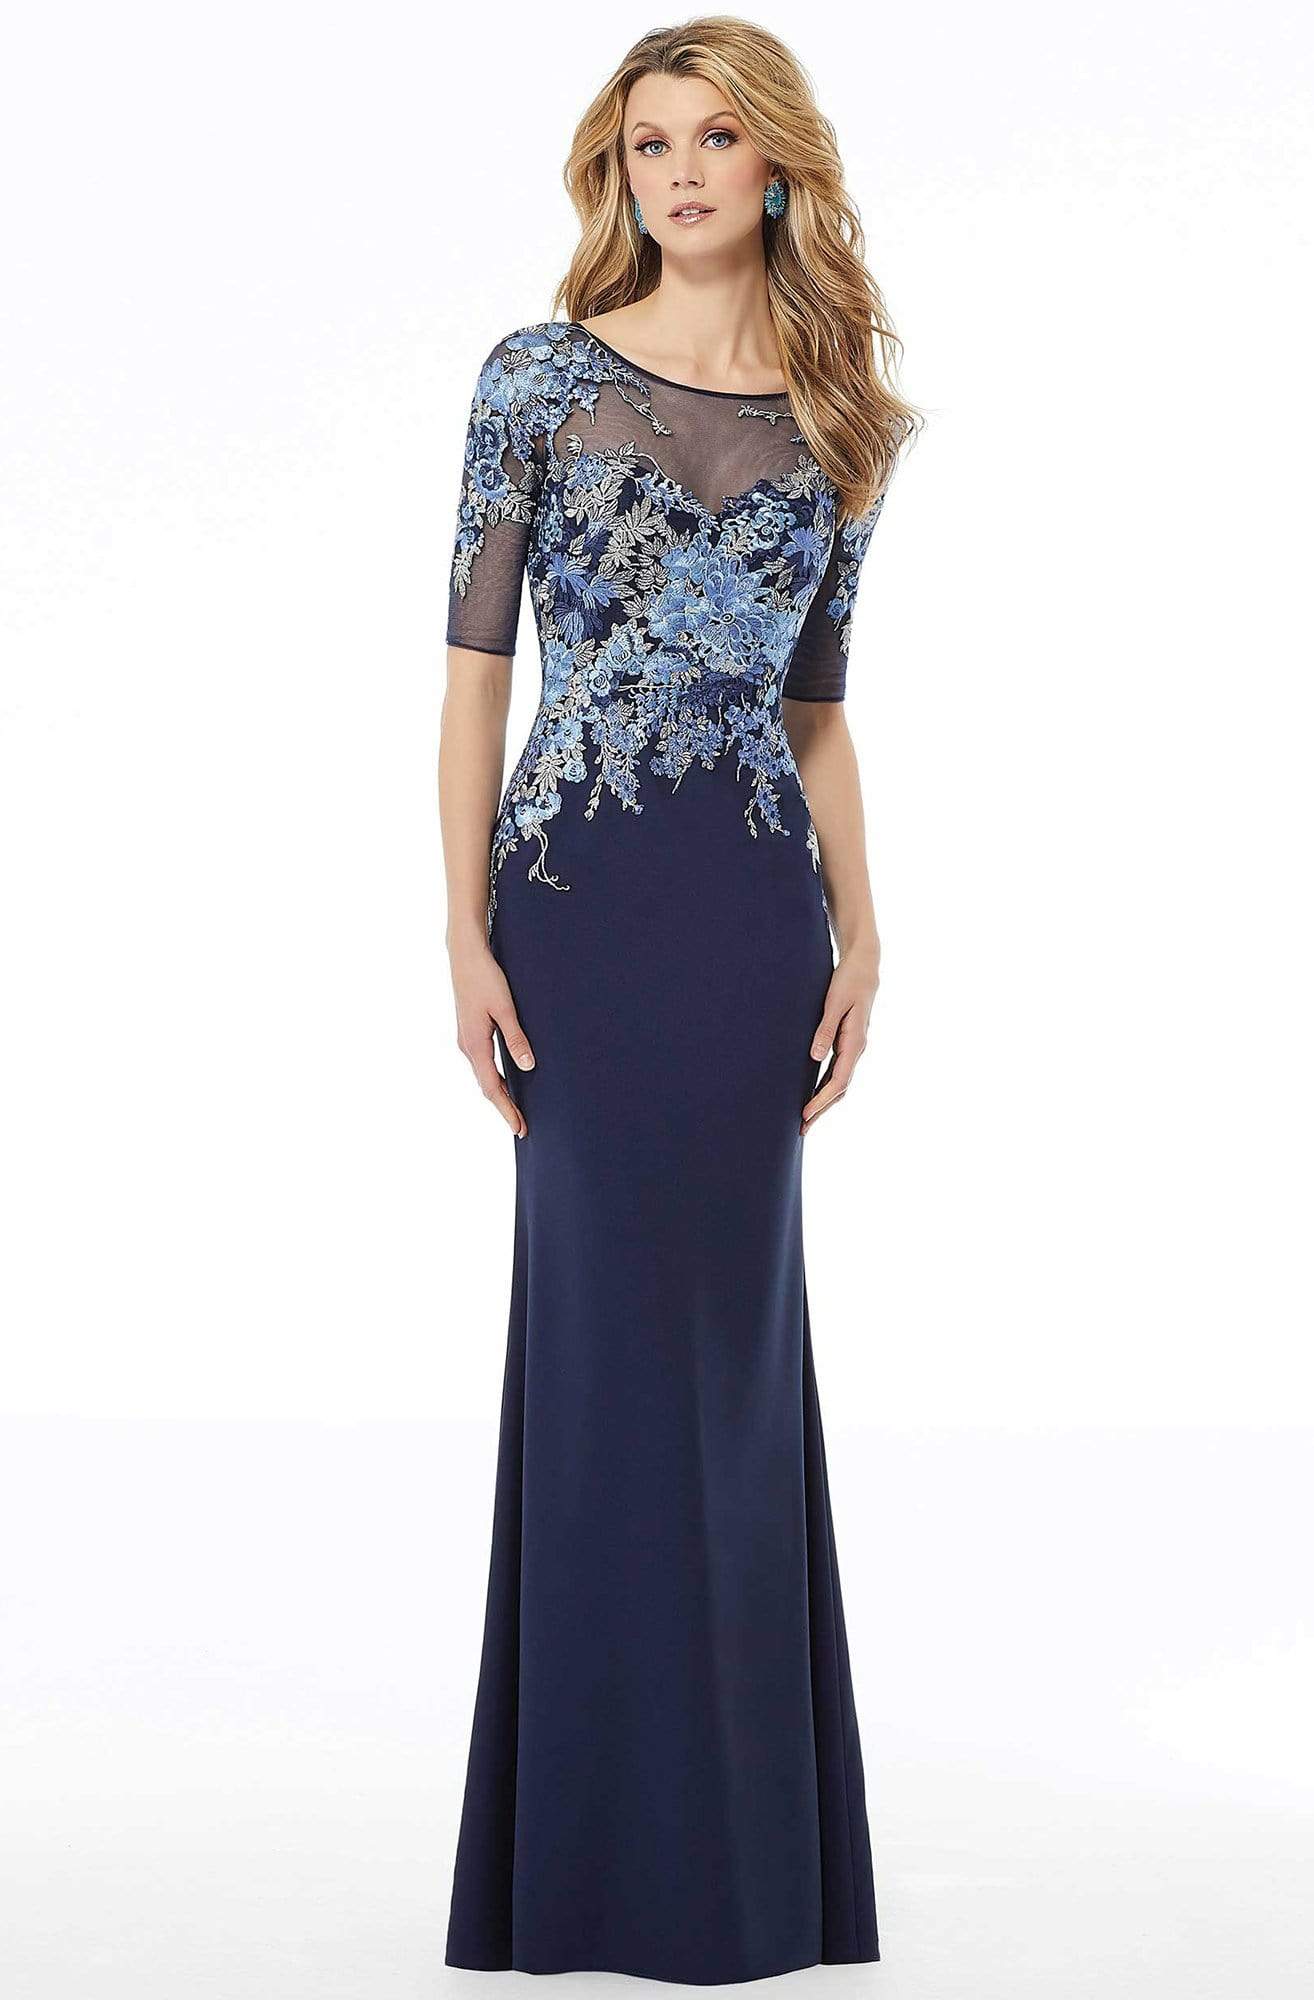 MGNY By Mori Lee - 72110 Embroidered Bateau Stretch Crepe Sheath Dress Mother of the Bride Dresses 2 / Navy